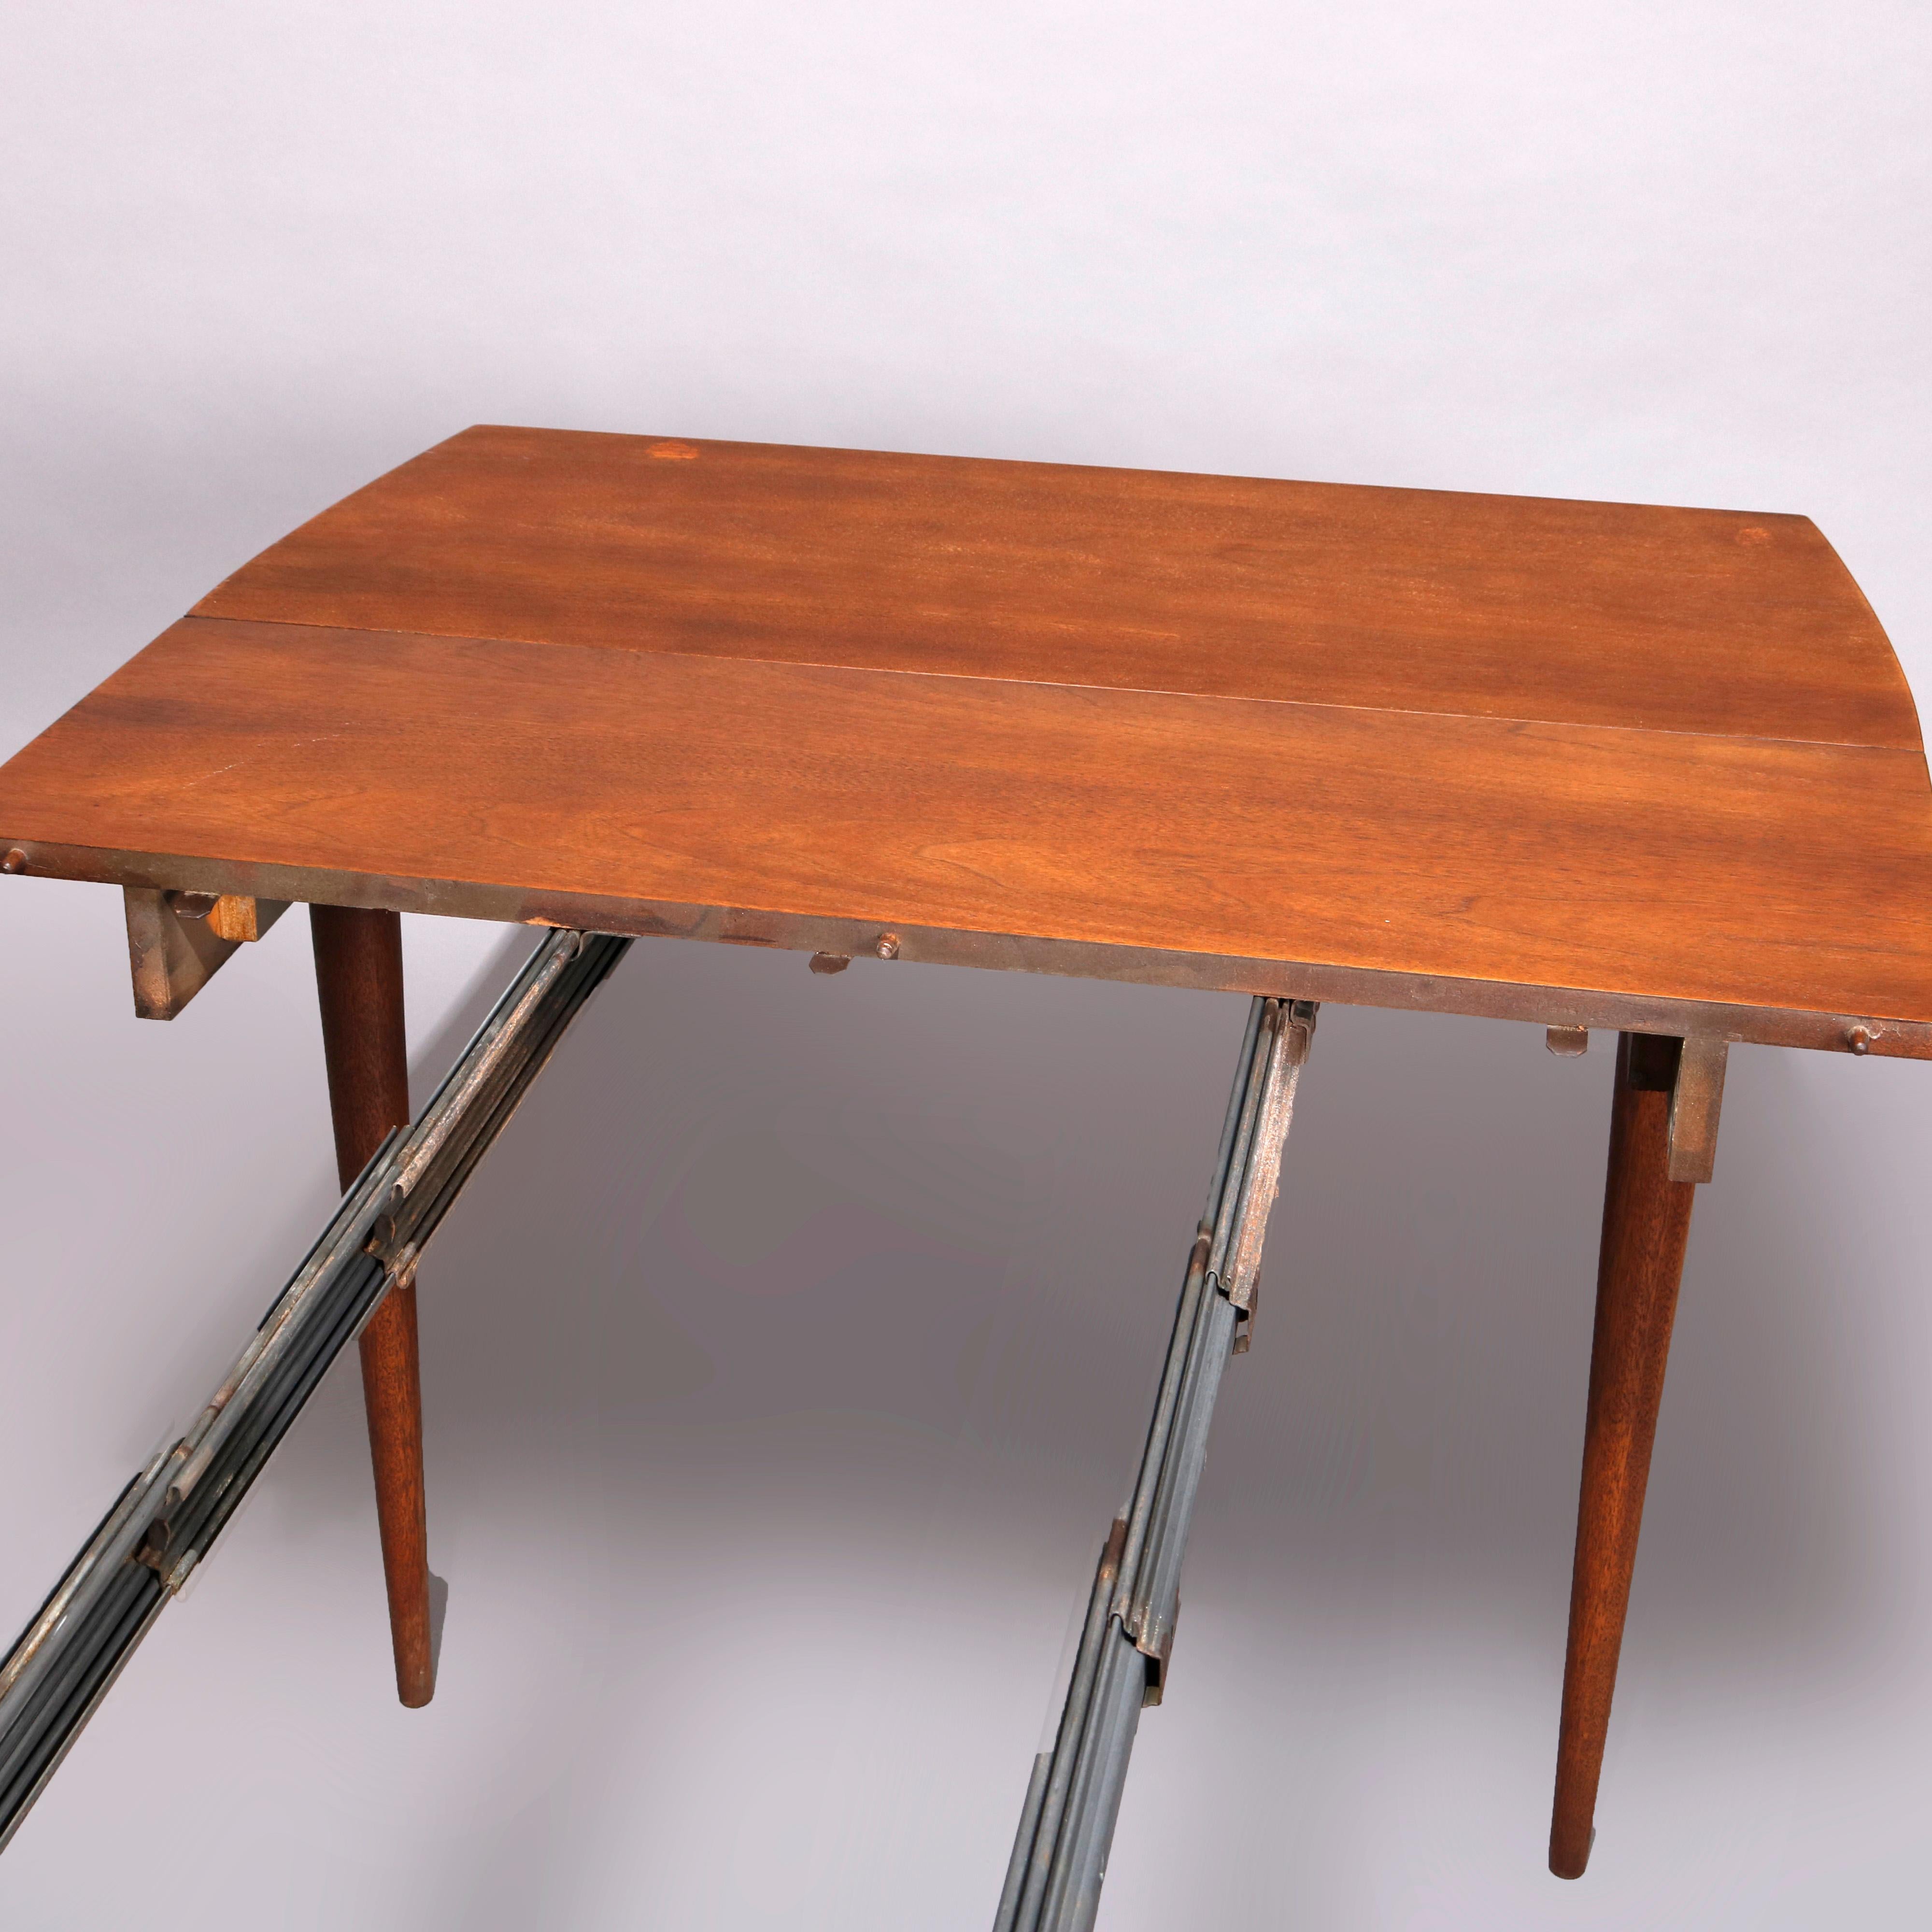 Midcentury Danish Modern Walnut Dining Table & Chairs by Broyhill, 20th Century 2